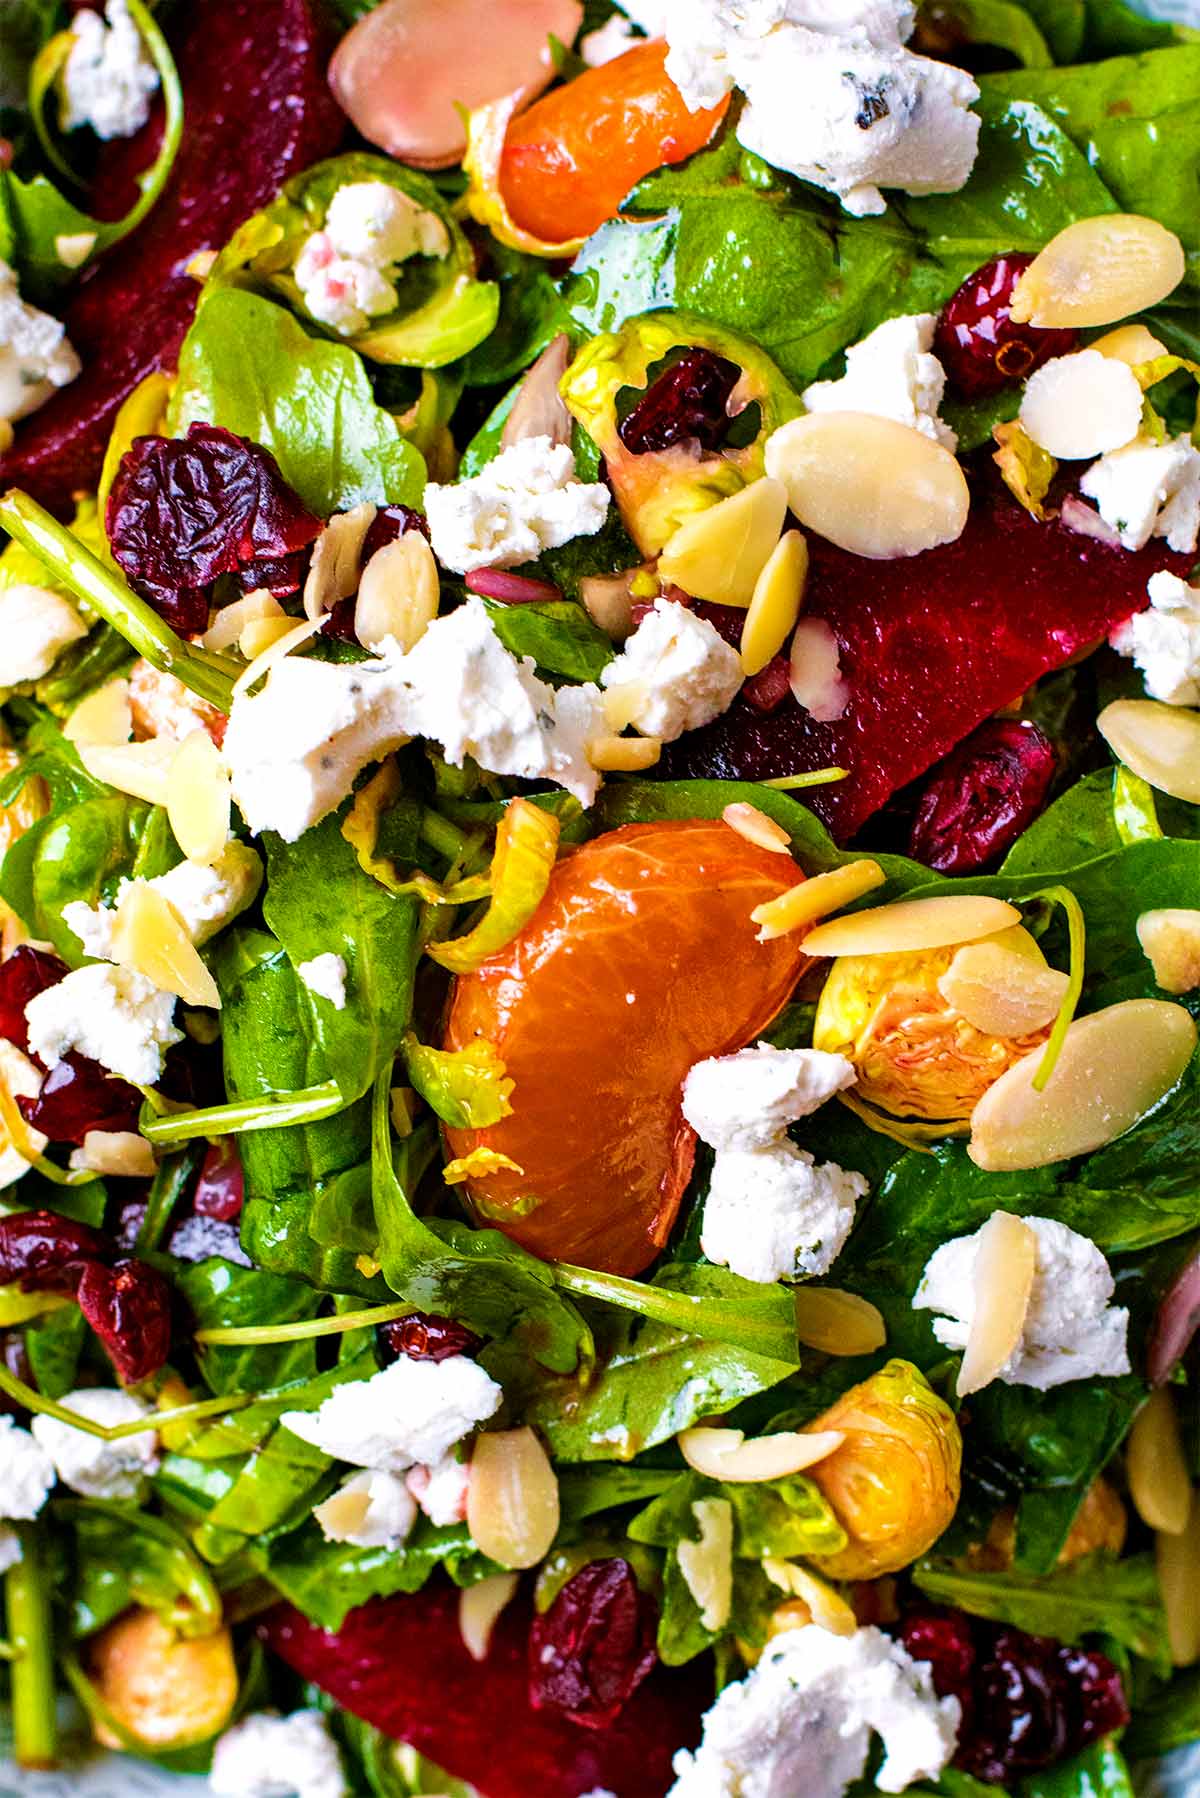 Salad leaves topped with clementines, beetroot, goats cheese, almonds and cranberries.